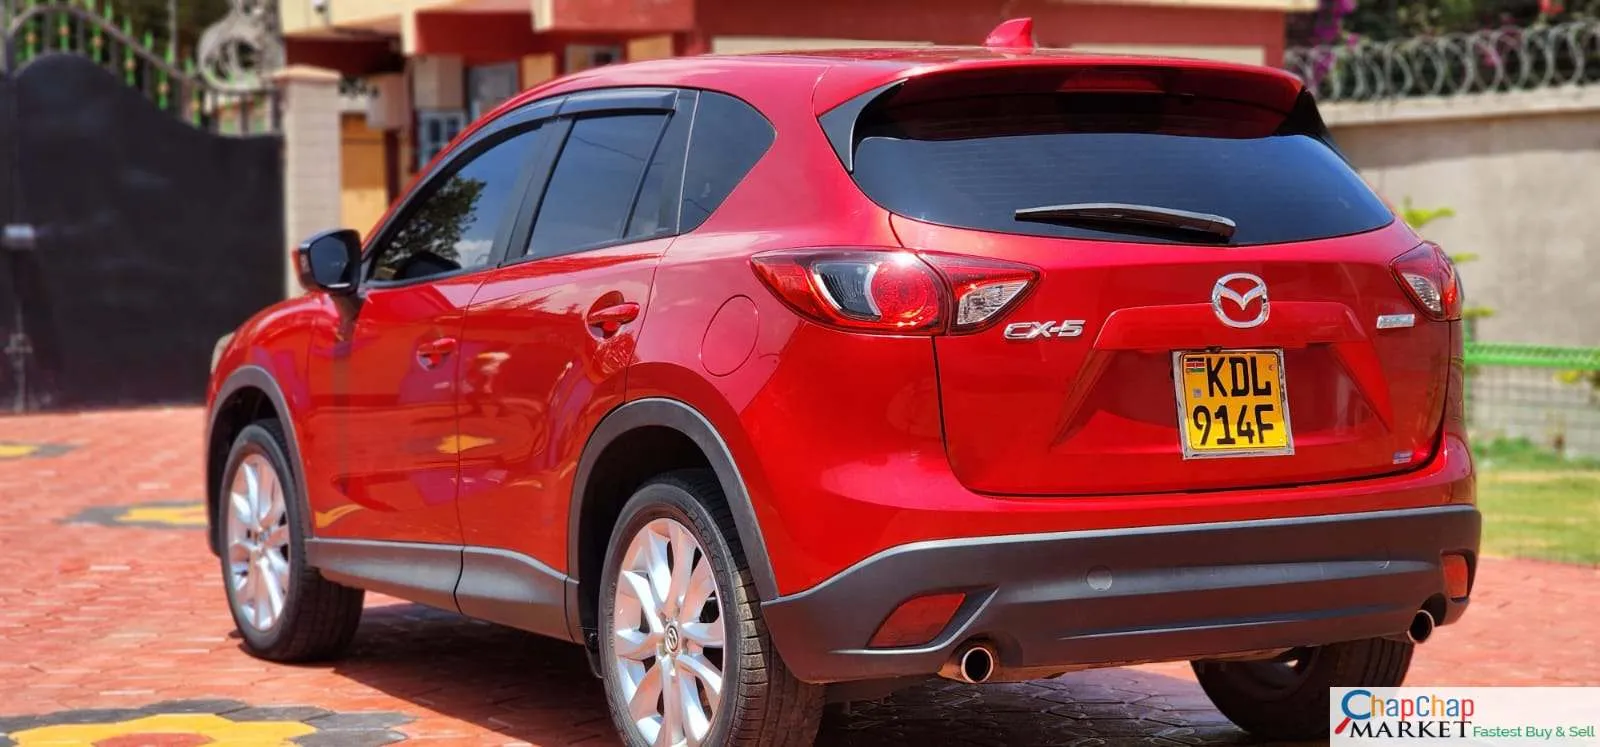 Cars Cars For Sale-Mazda CX-5 CX5 kenya You Pay 20% DEPOSIT TRADE IN OK cx5 for sale in kenya hire purchase installments EXCLUSIVE 6